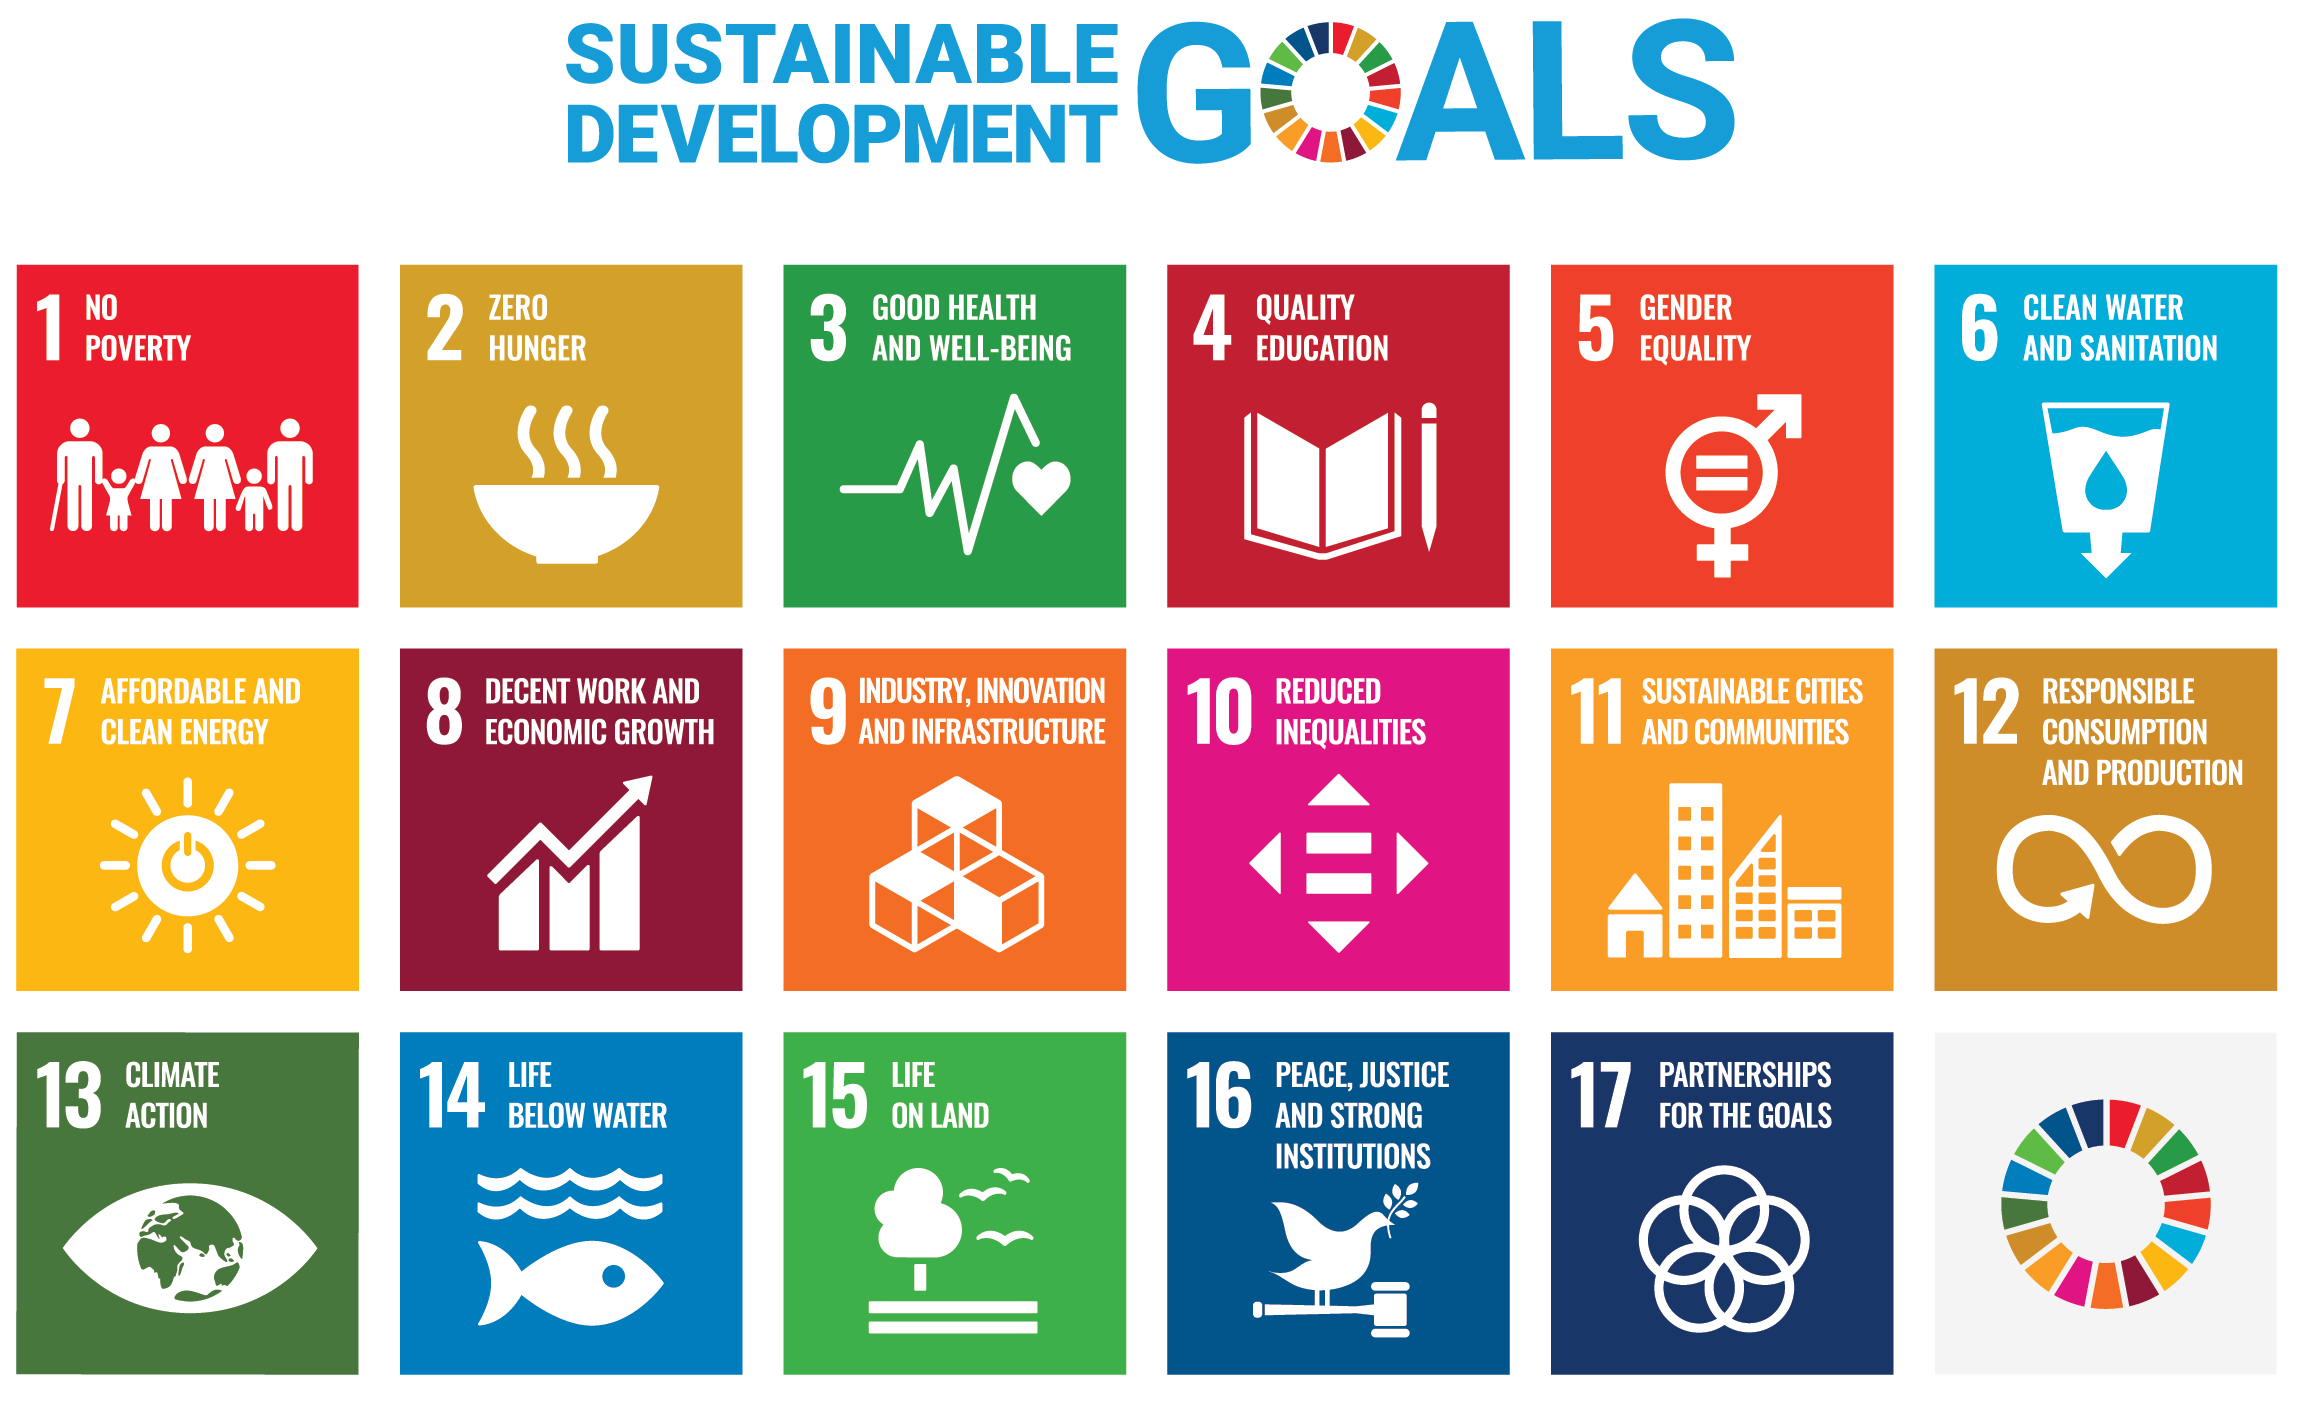 The Sustainable Development Goals (SDGs) 12 RESPONSIBLE CONSUMPTION AND PRODUCTION